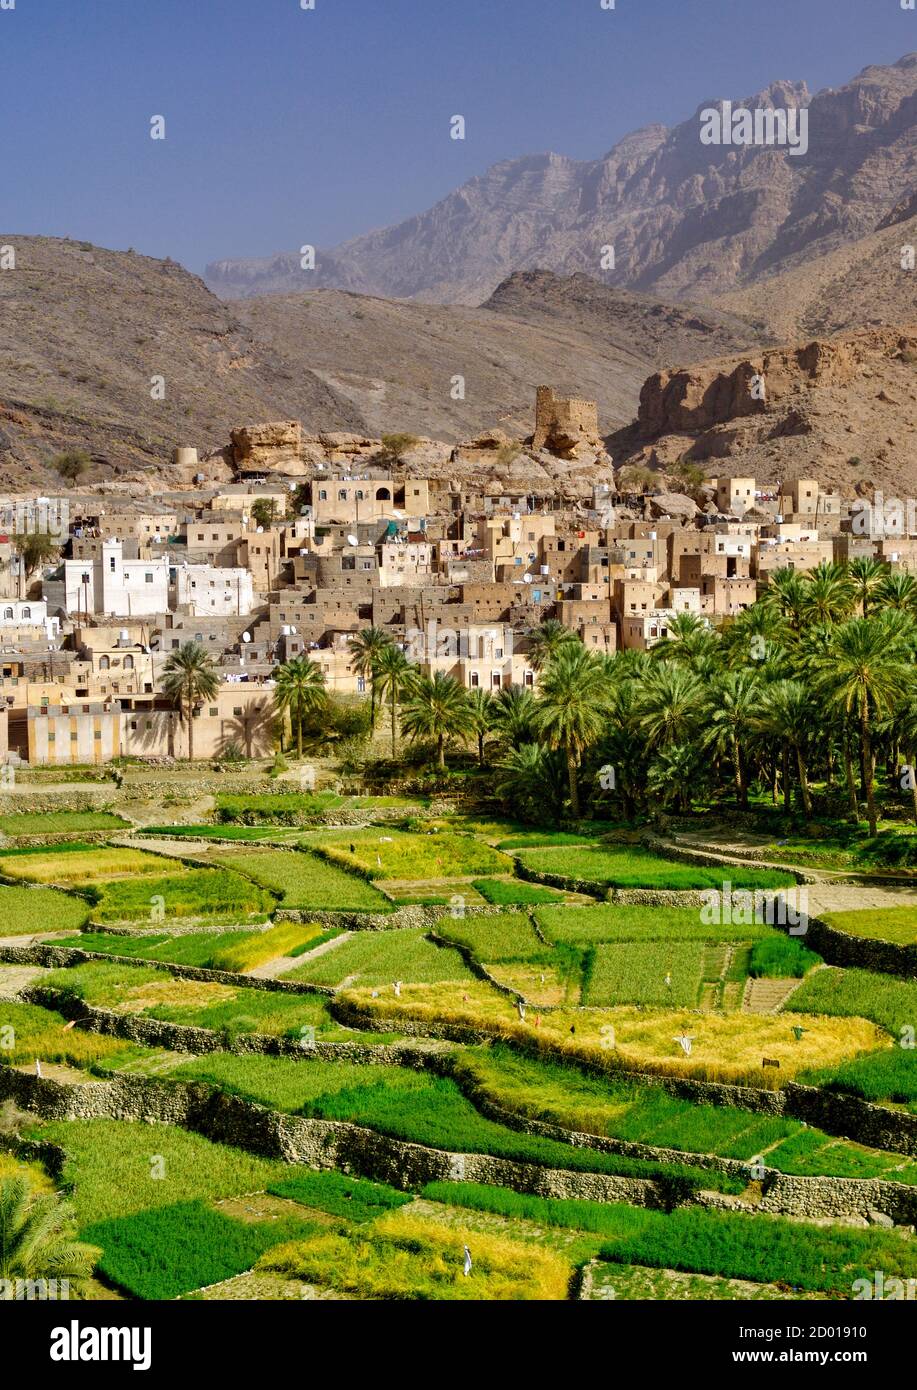 The village of Bilad Seet and its plantations in Wadi Bani Auf in the Jebel Akhdar mountains of Oman. Stock Photo